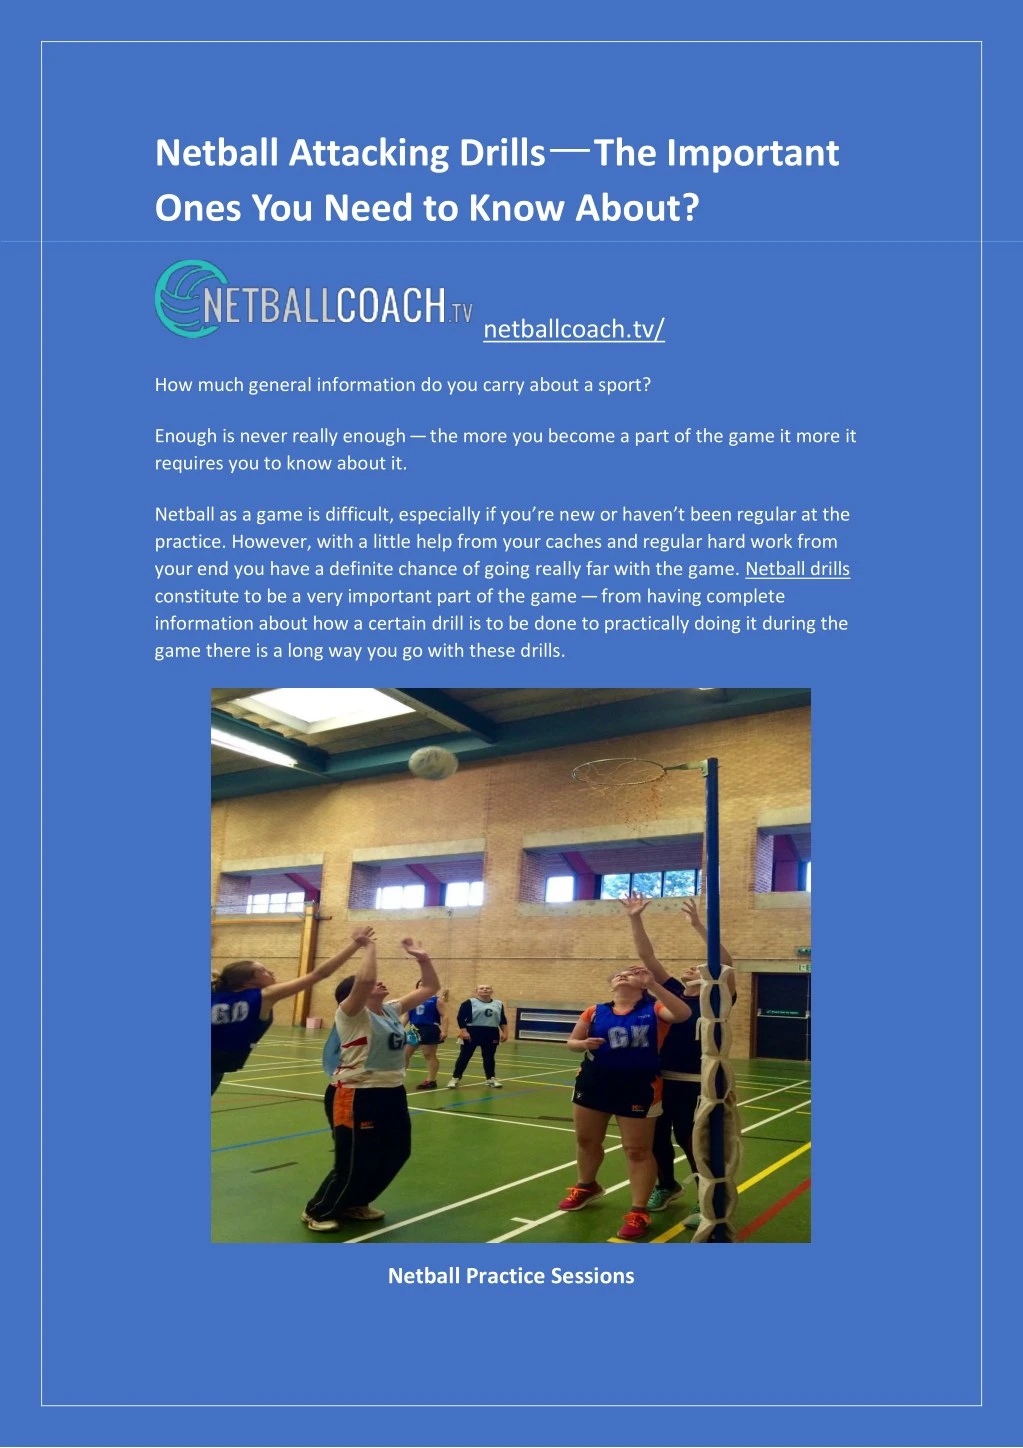 netball attacking drills ones you need to know